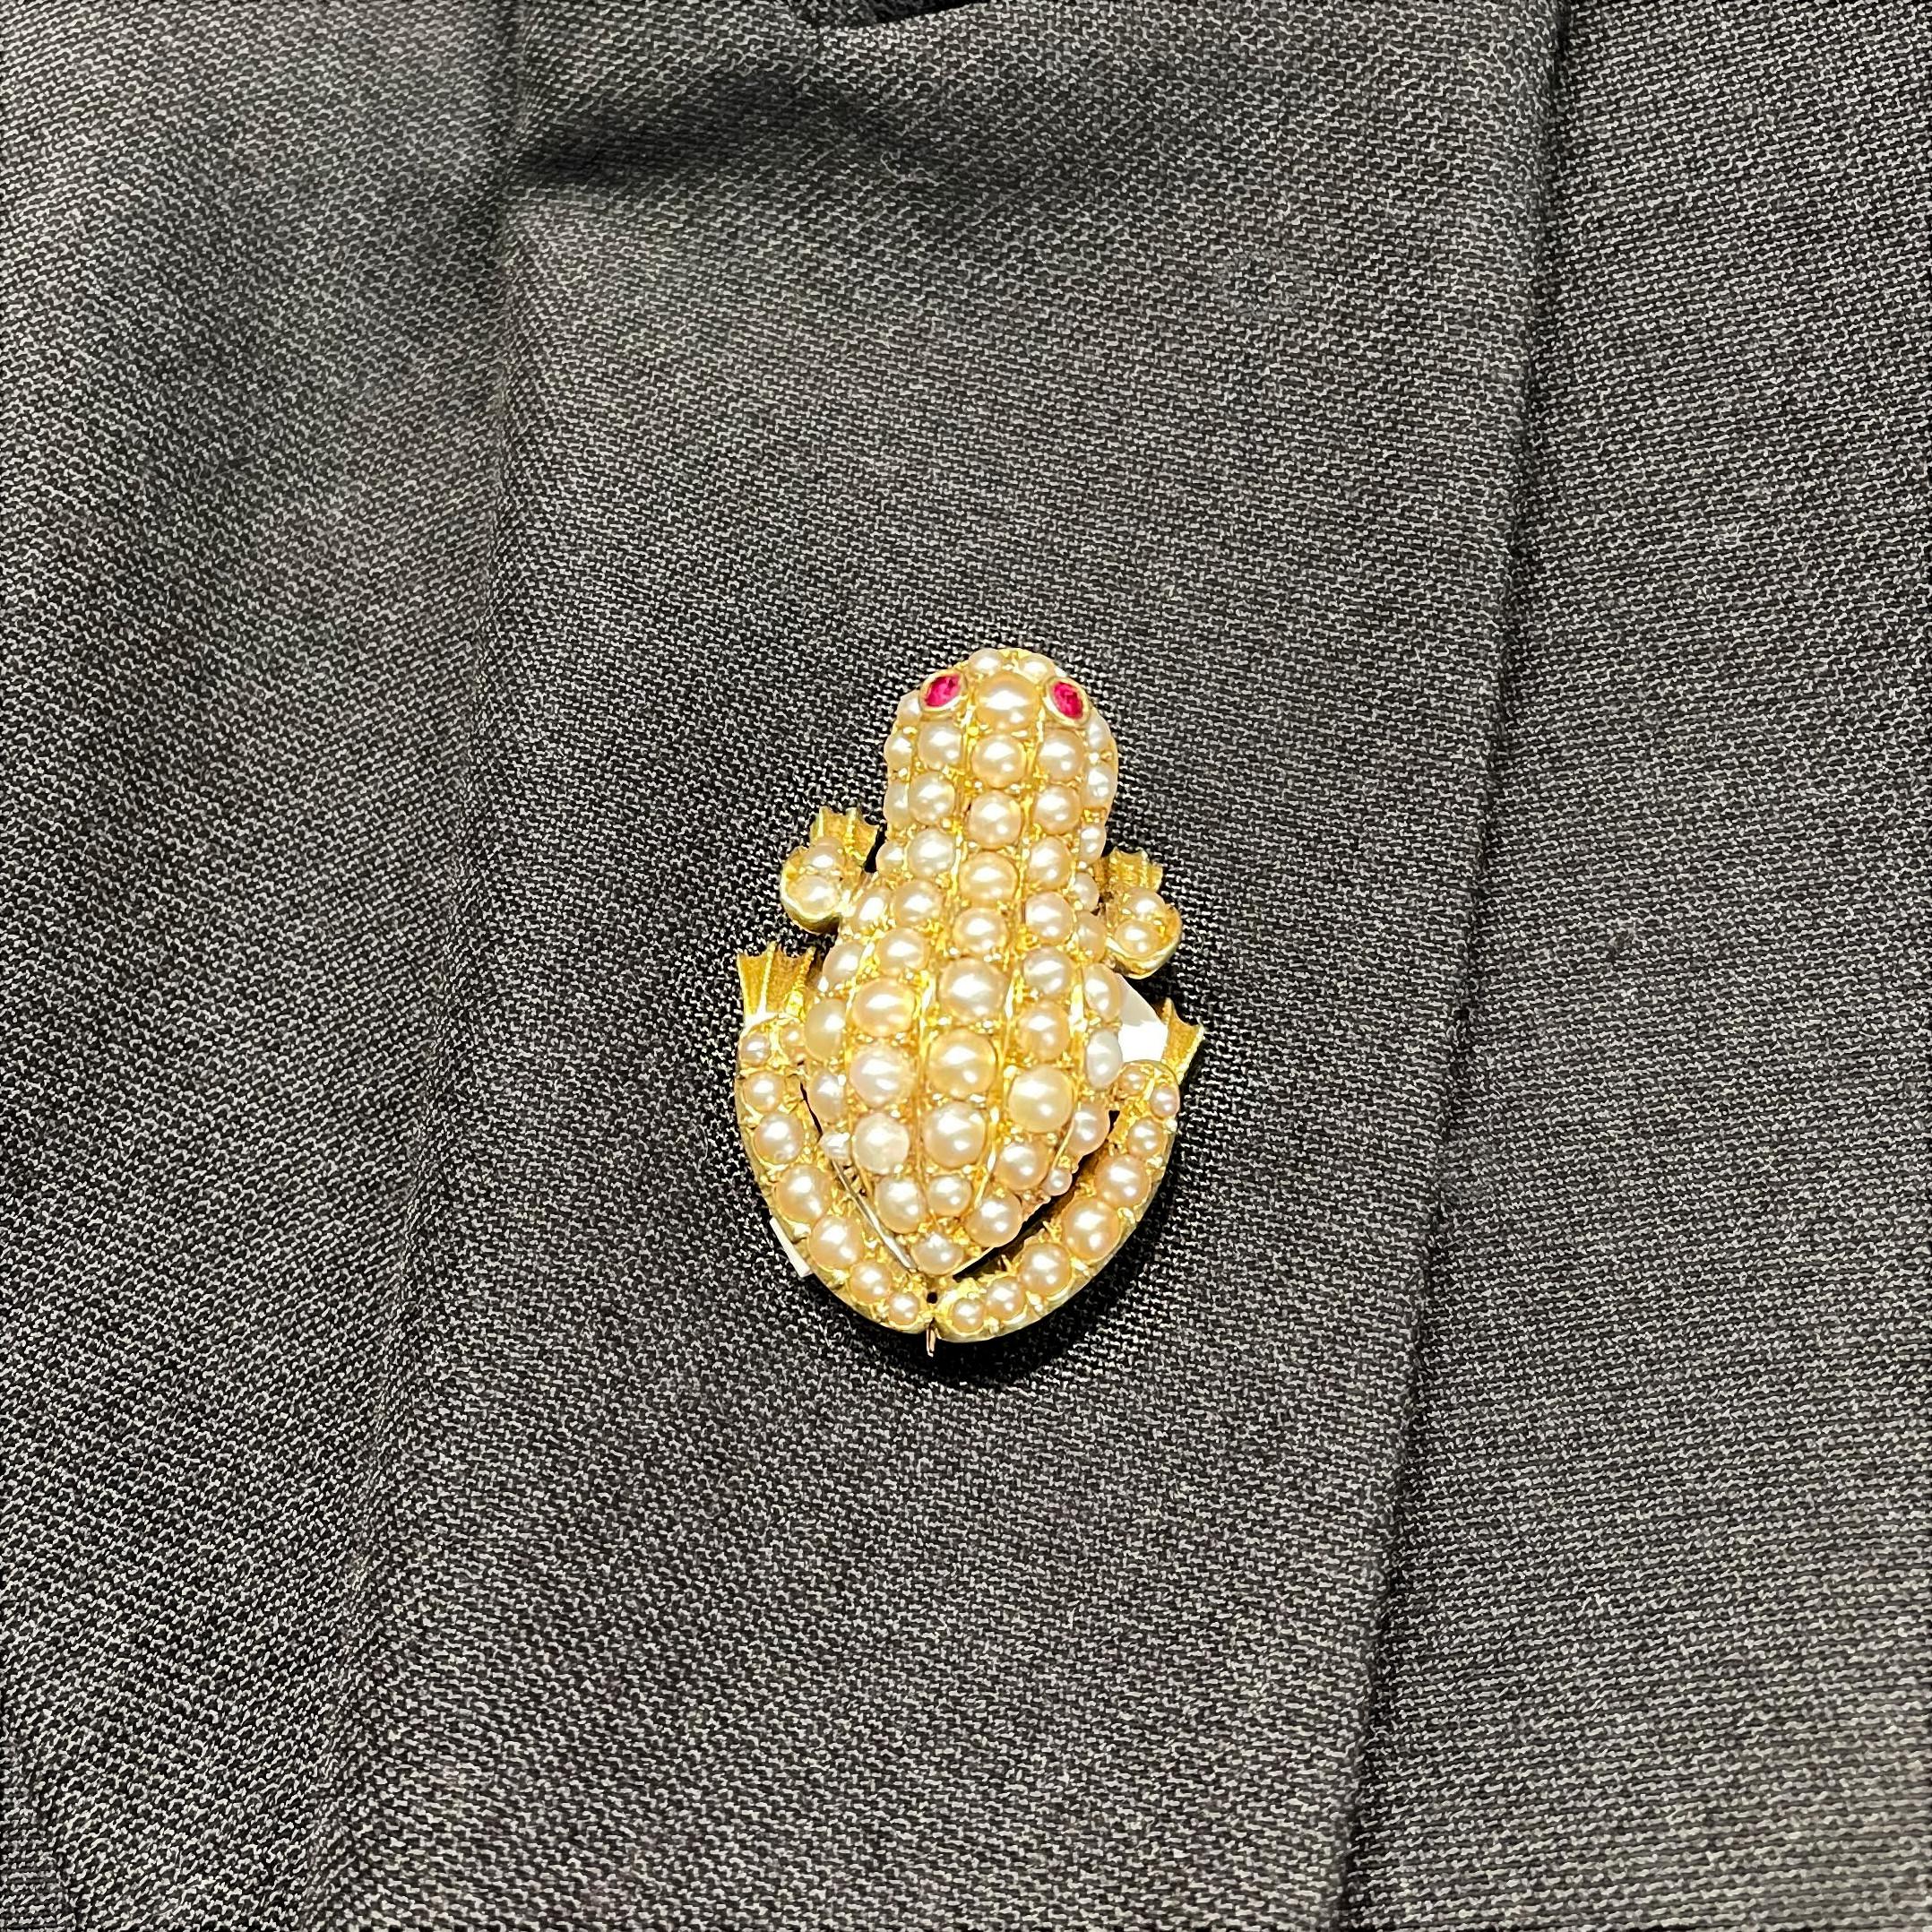 A late Victorian pearl frog brooch, set with natural seed pearls and cushion-cut ruby eyes, mounted in 18ct yellow gold, with an 18ct stamp, English, circa 1900.